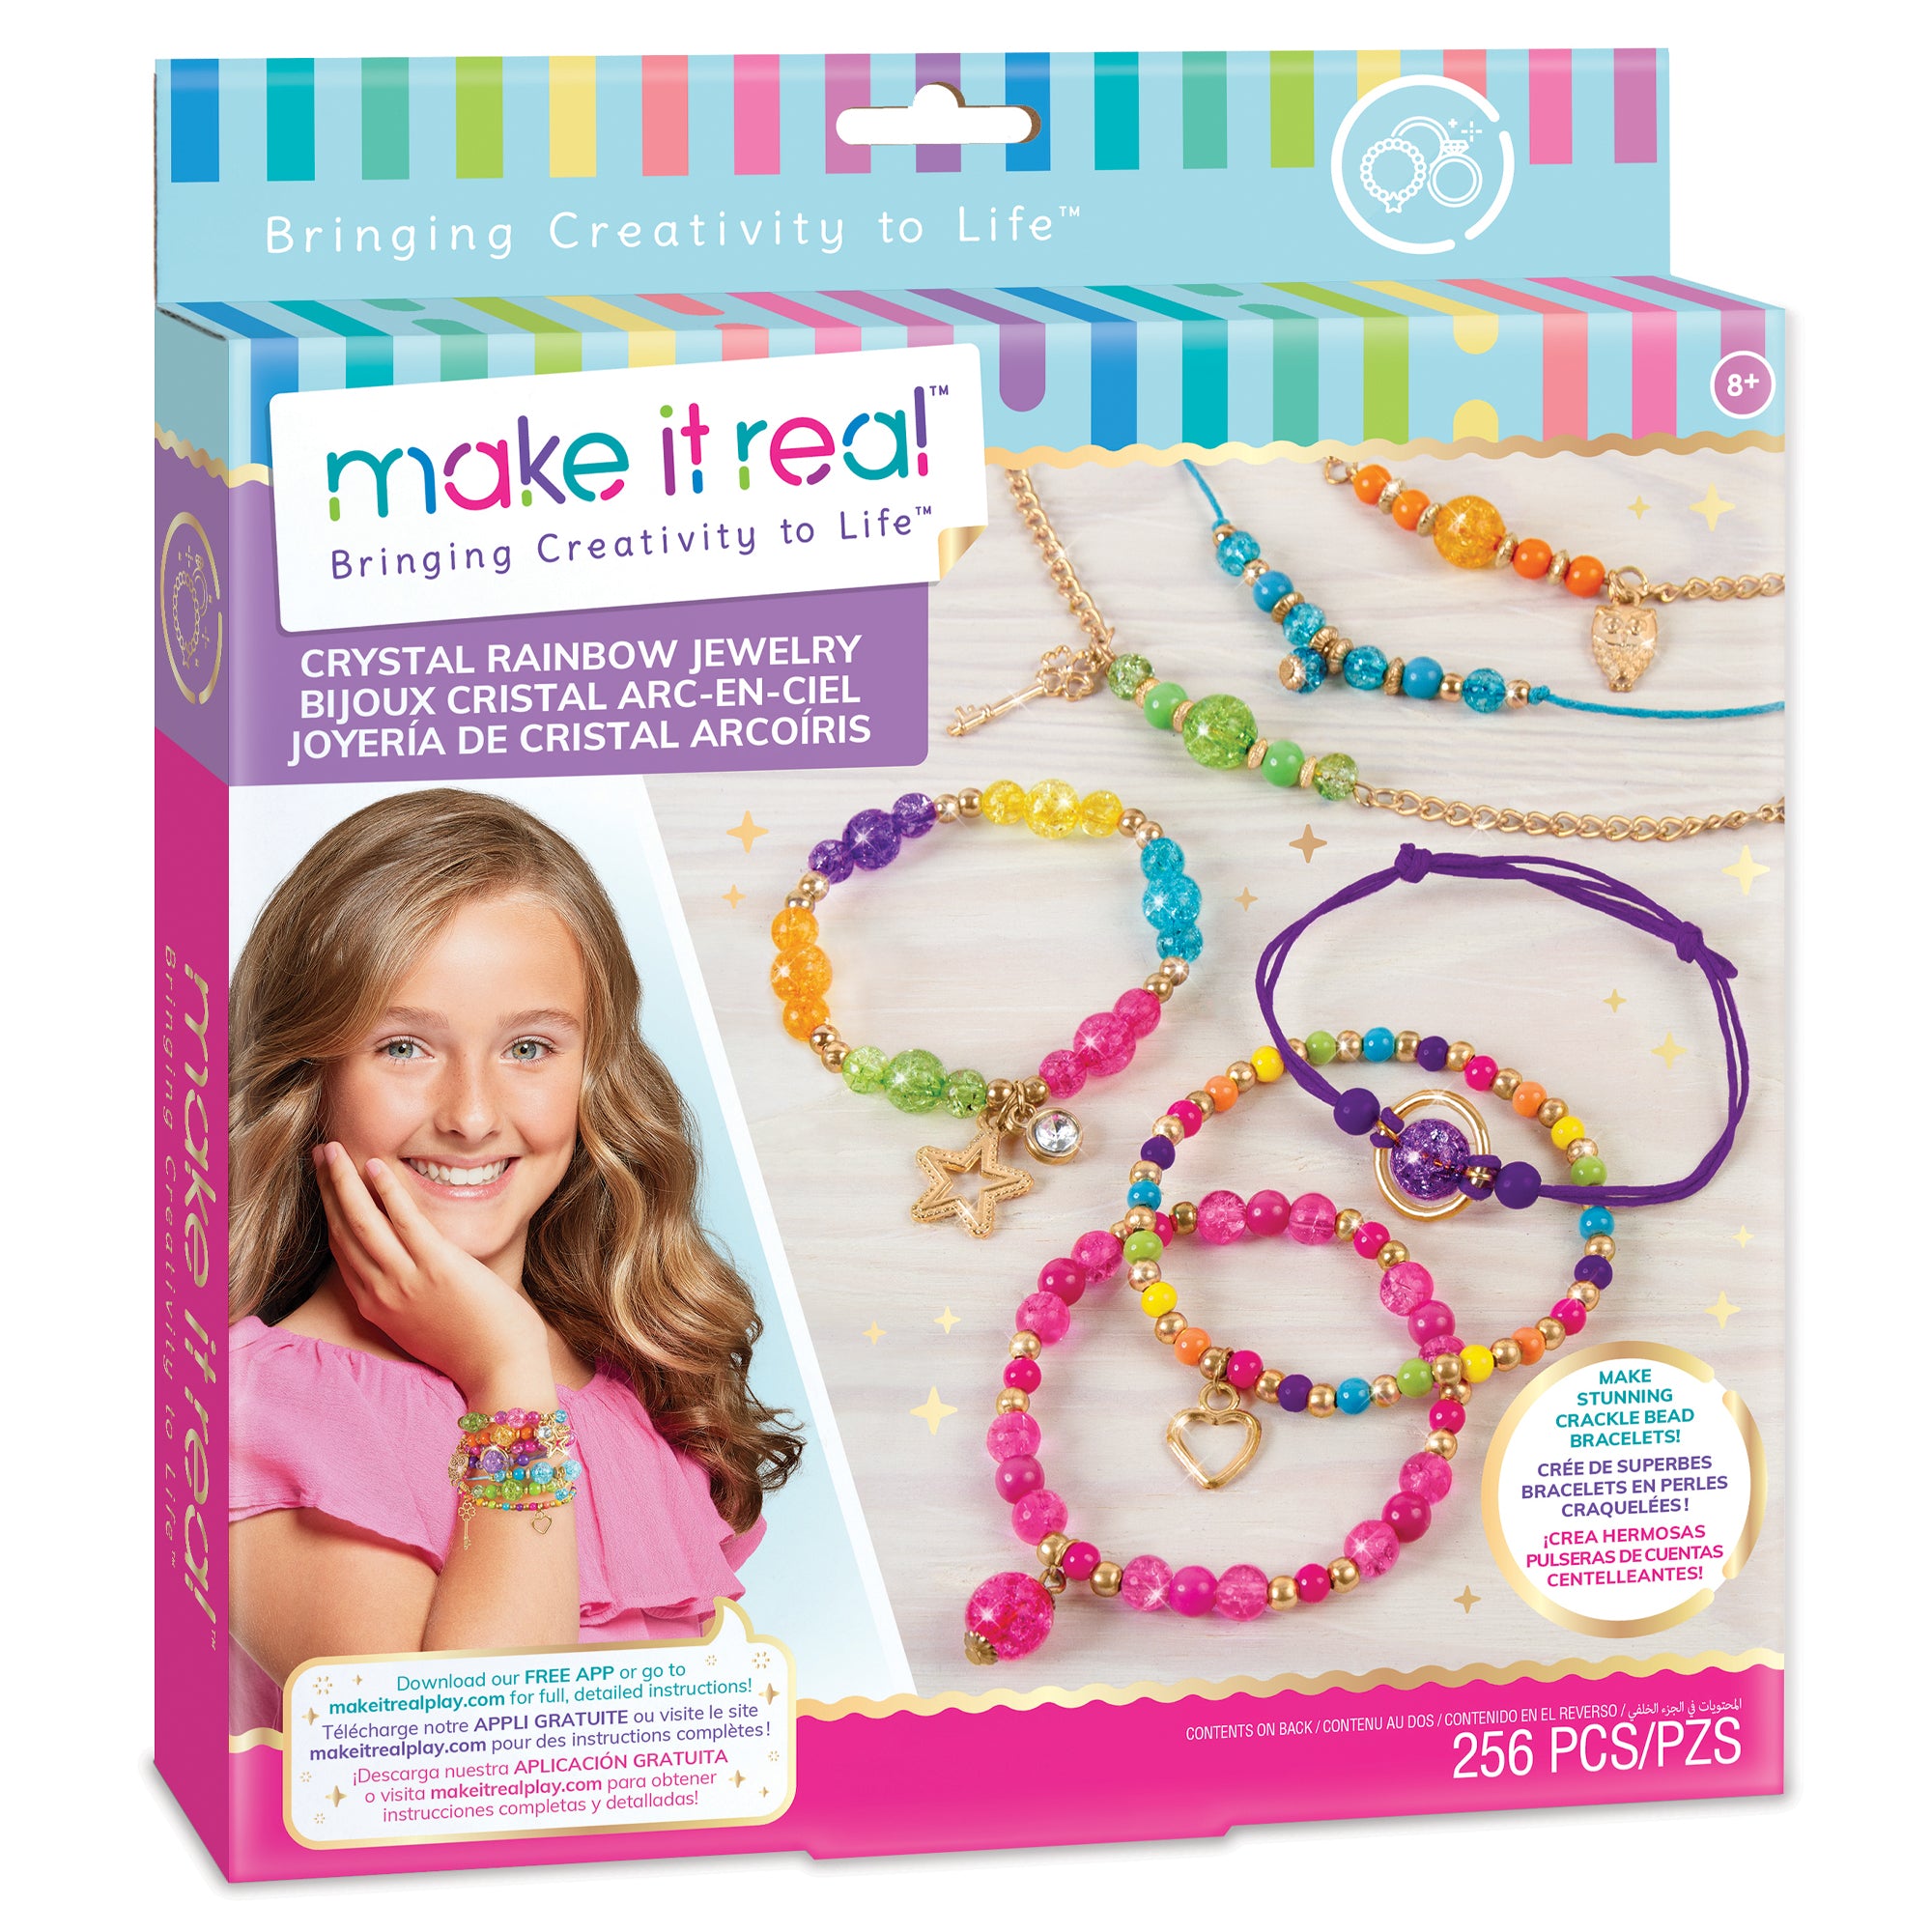 Sparkly Spirals Jewelry – Make It Real